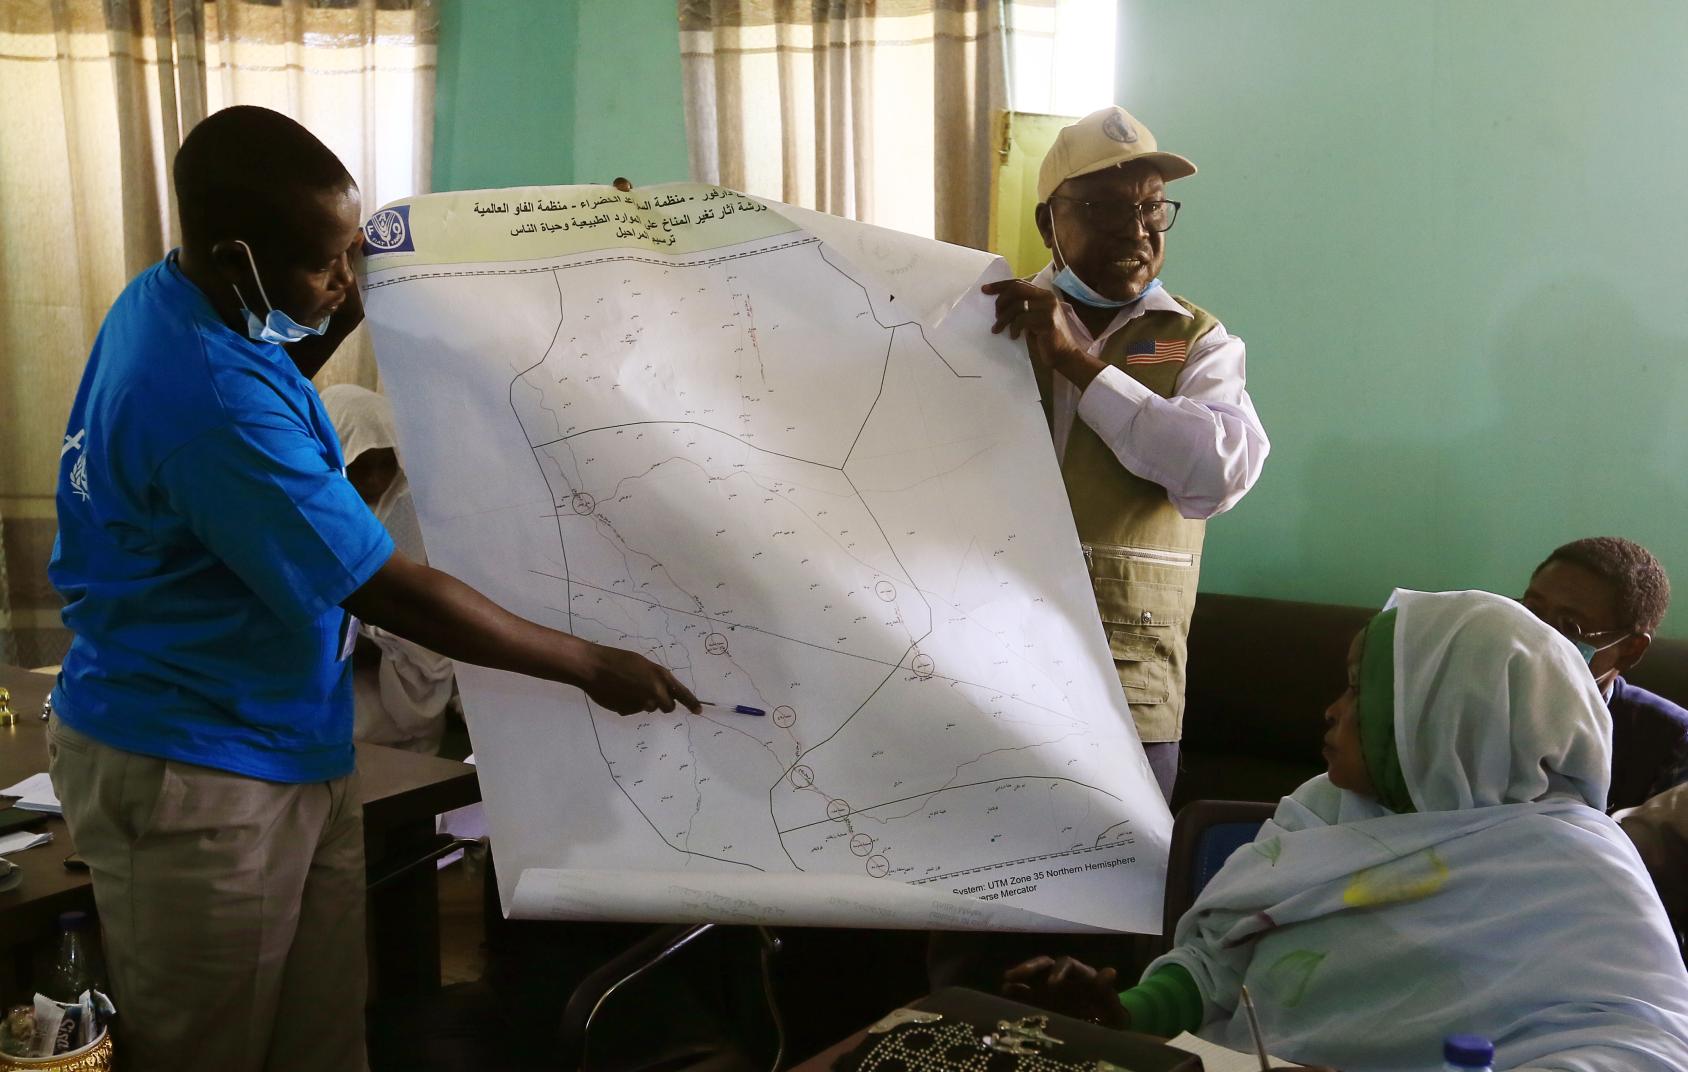 FAO staff present migratory routes and conflict hotspots to a group of people in Yassin village, East Darfur.